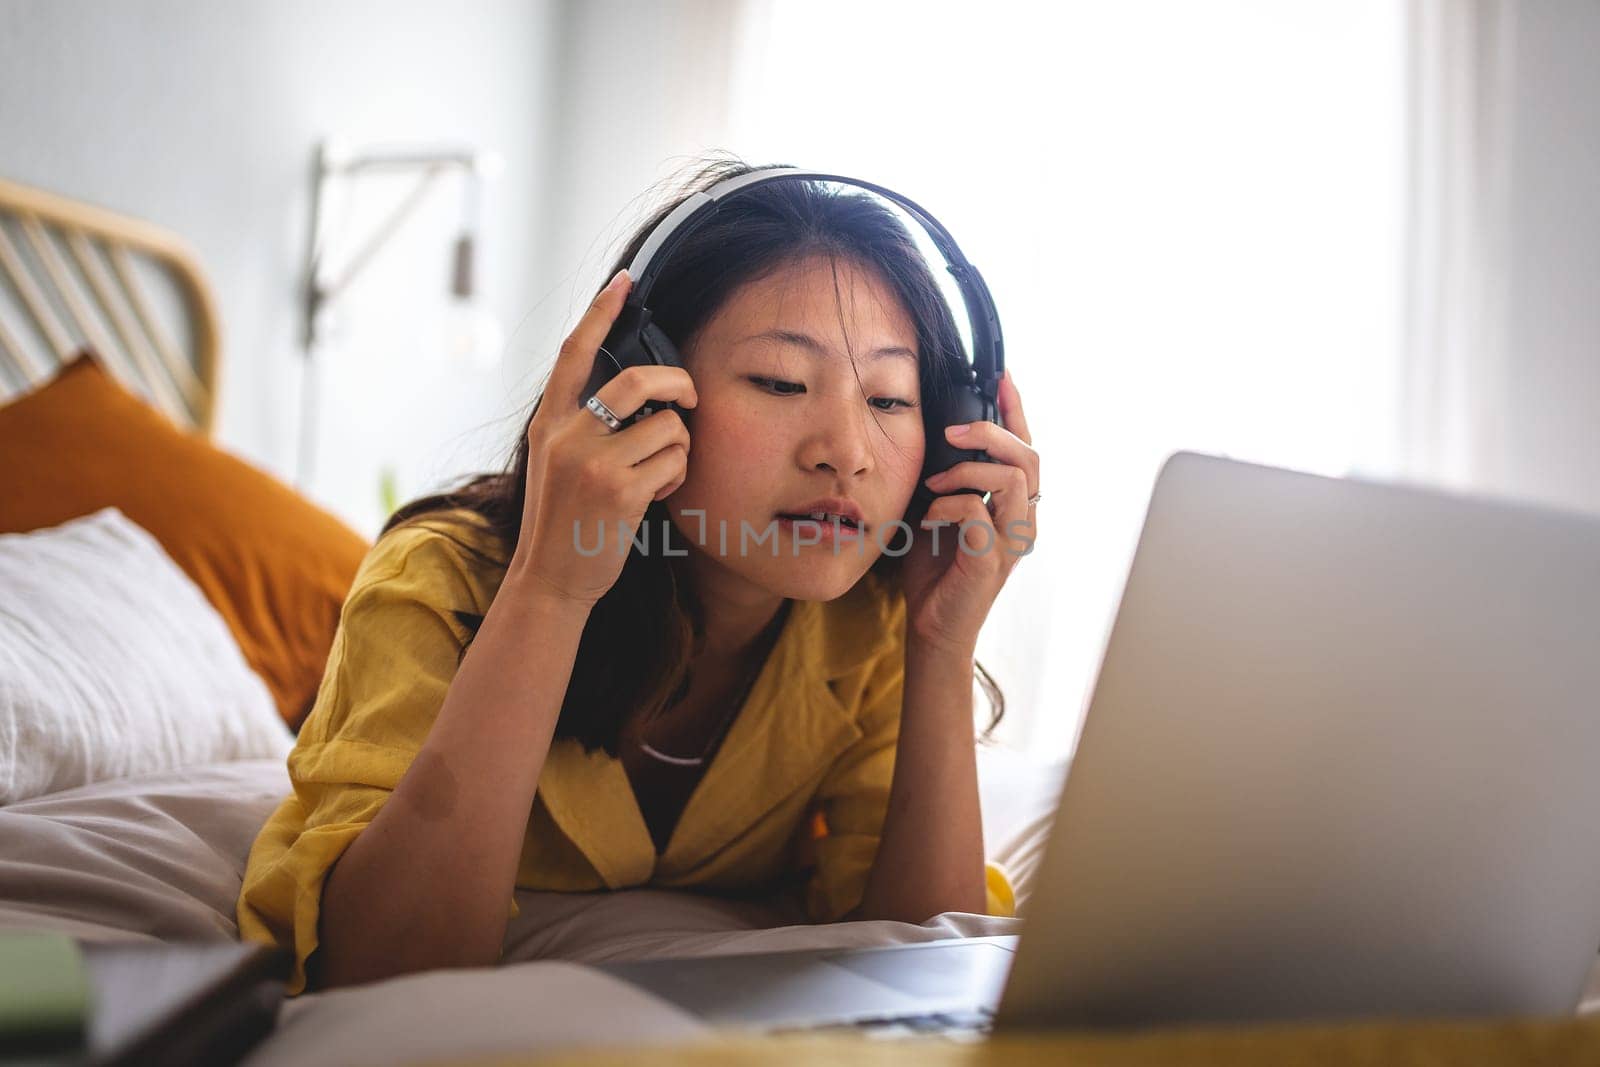 Teen asian girl putting on headphones to attend online classes. Chinese female watch movie on laptop. Listen to music at home lying on bed. Lifestyle and e-learning concept.